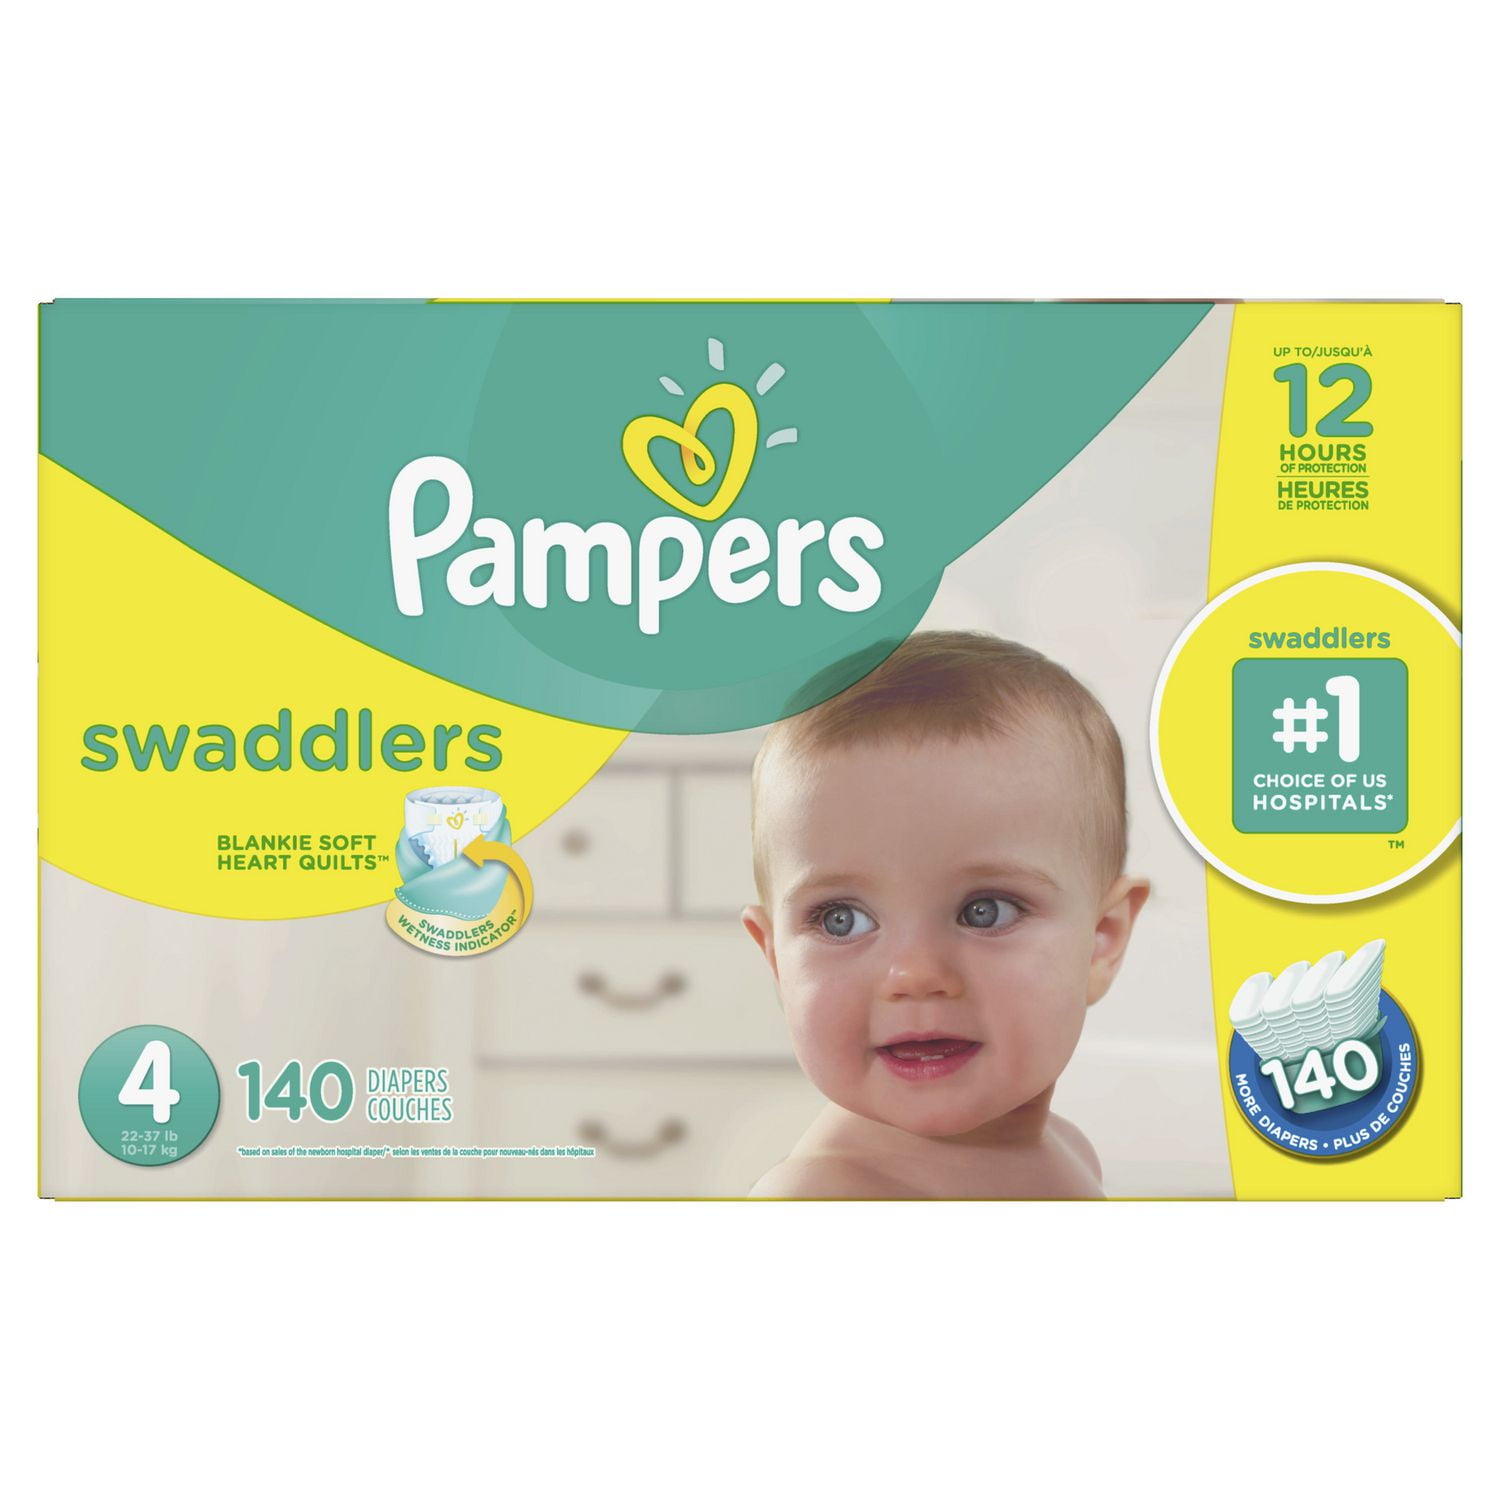 Pampers-Swaddlers Diapers-Newborn through Size 5 Available